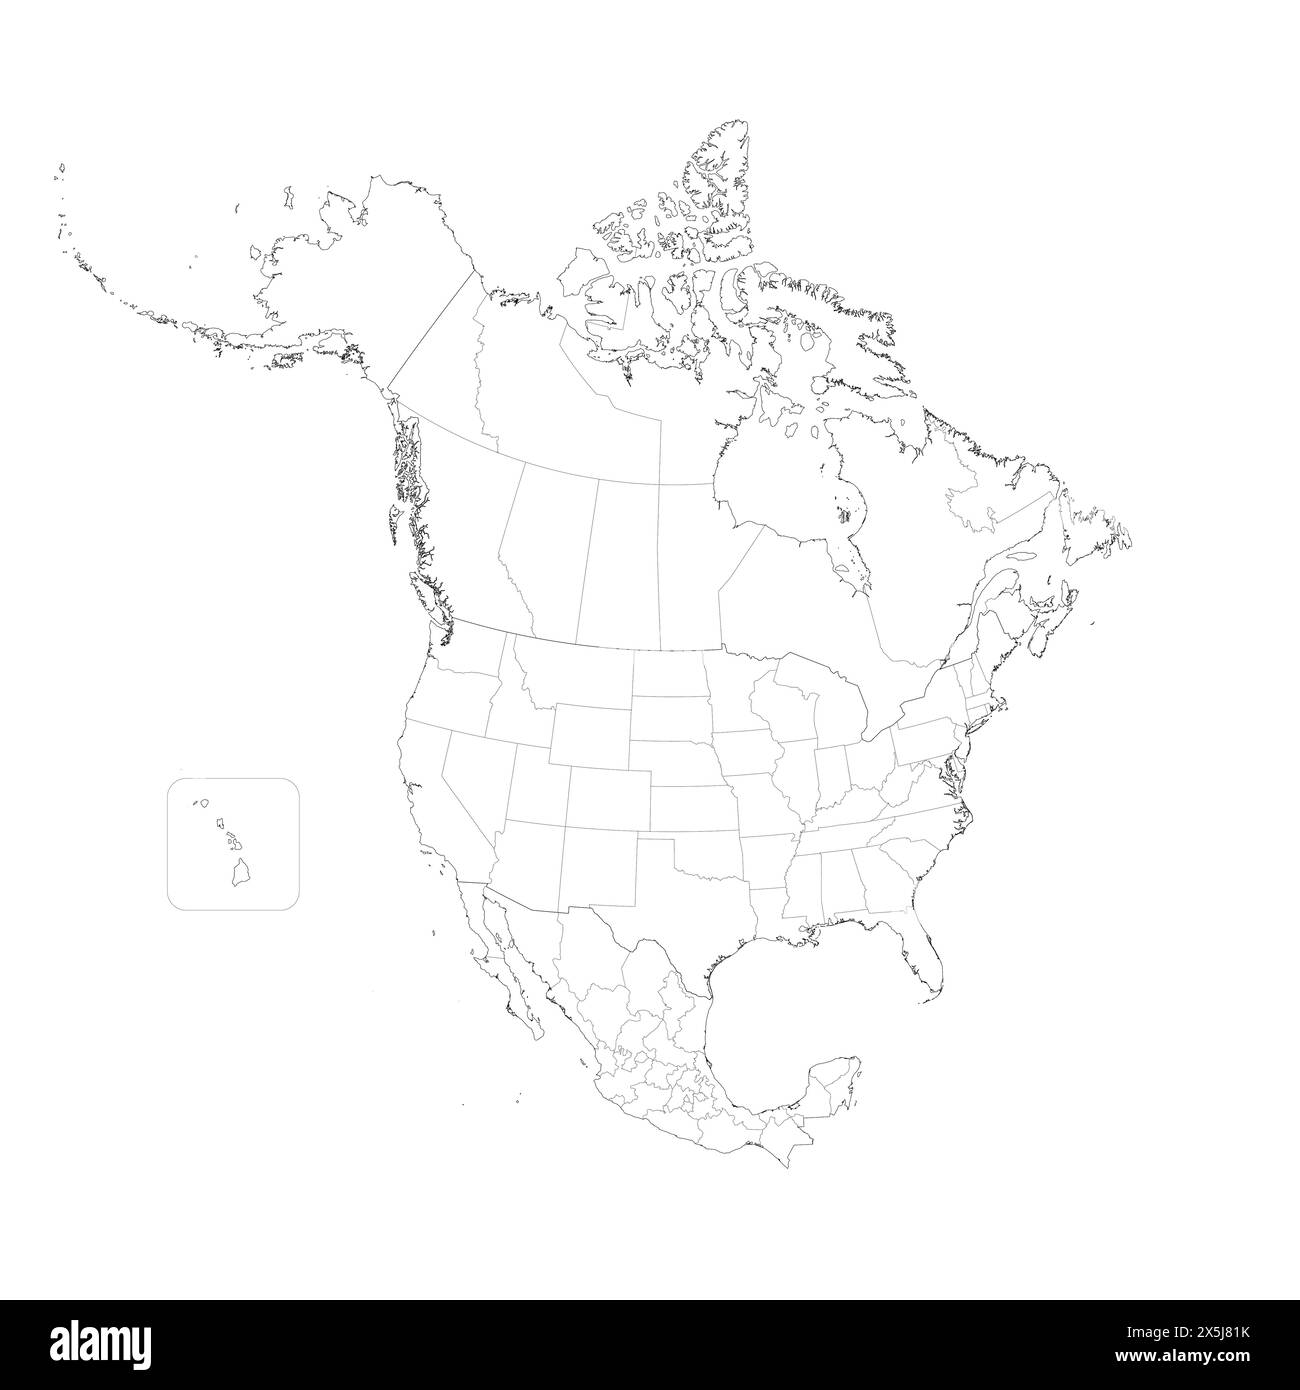 Political map of North American countries Canada, United States of America and Mexico with administrative divisions. Thin black outline map with countries and states name labels. Vector illustration Stock Vector